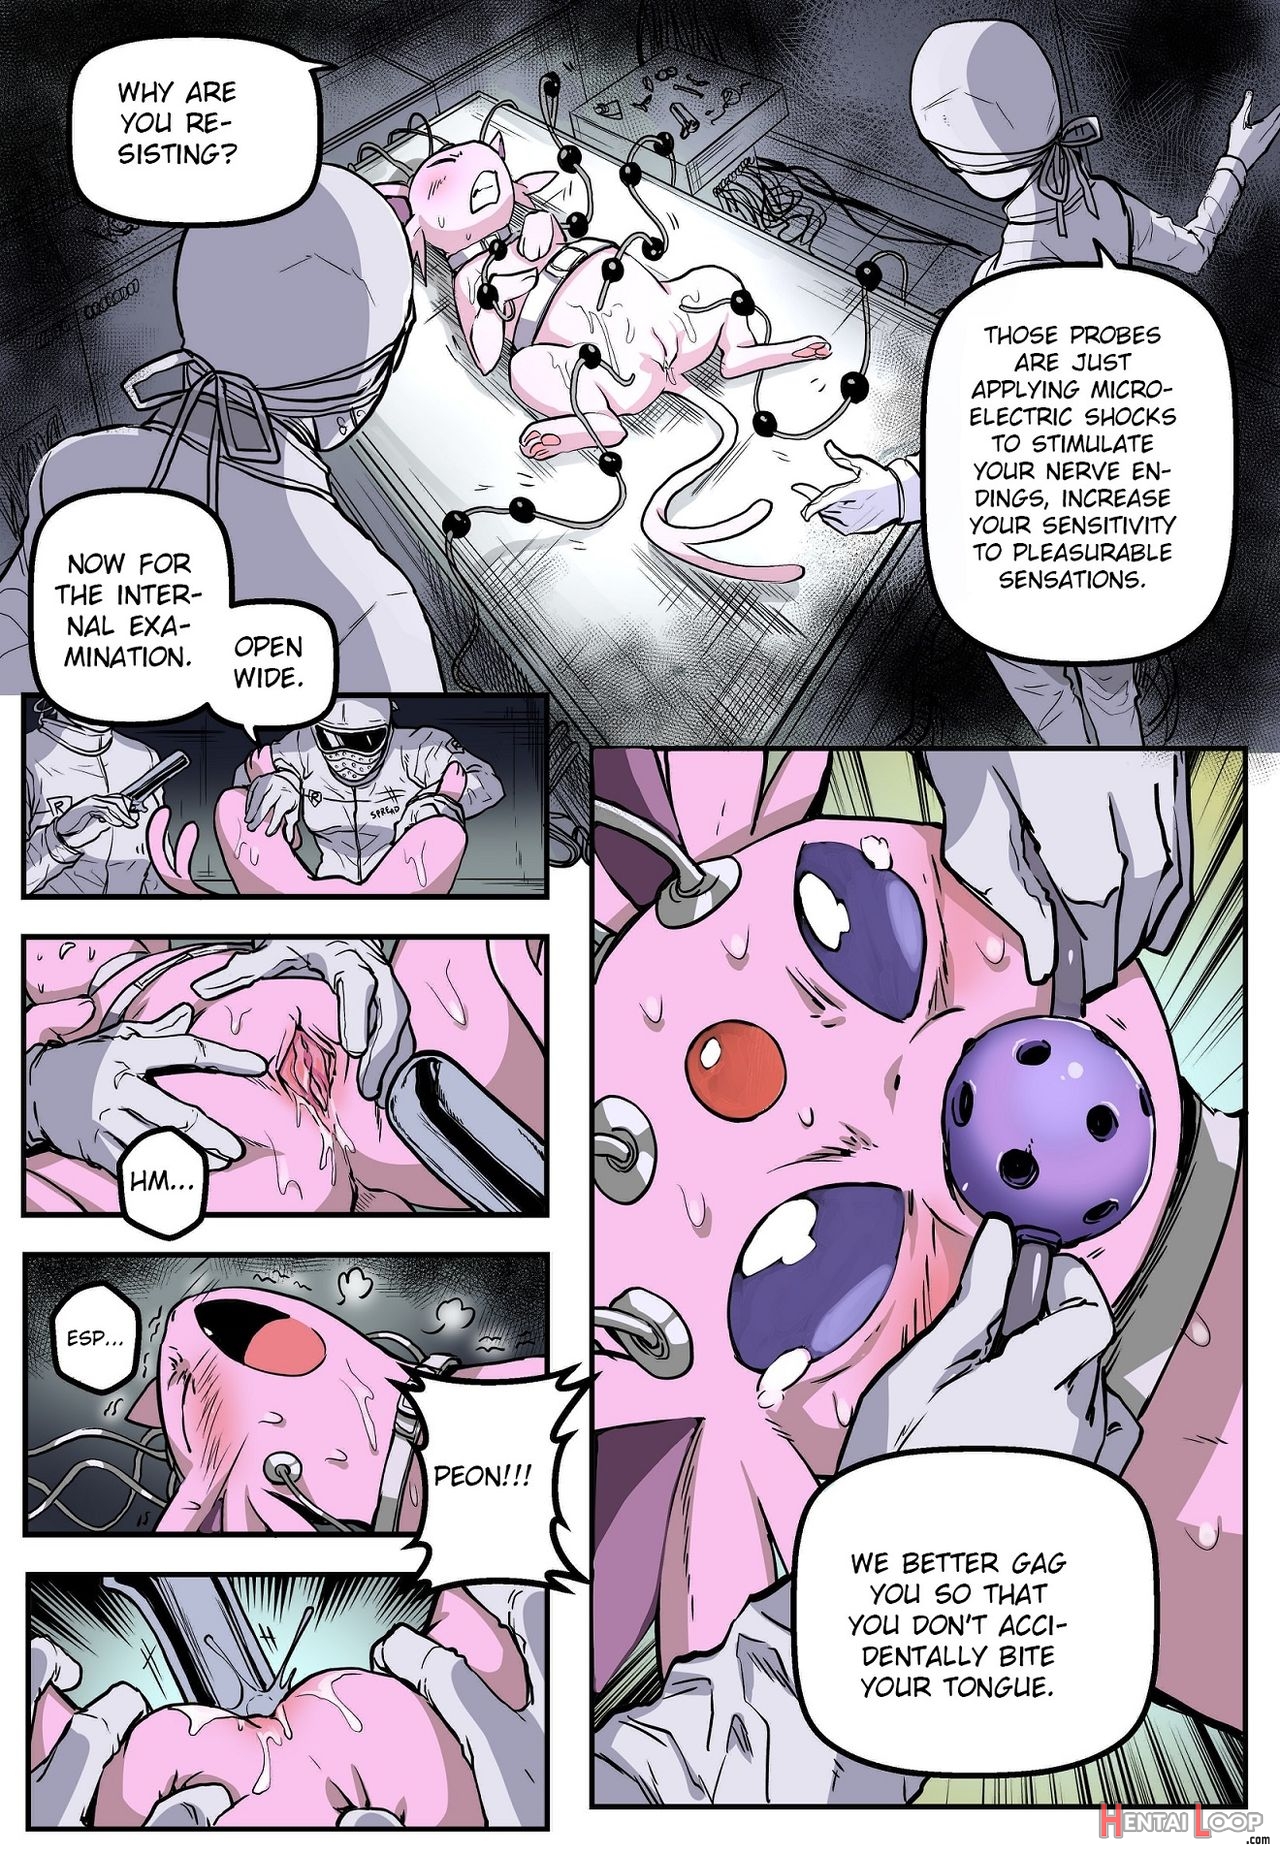 The Experiment Espeon page 7